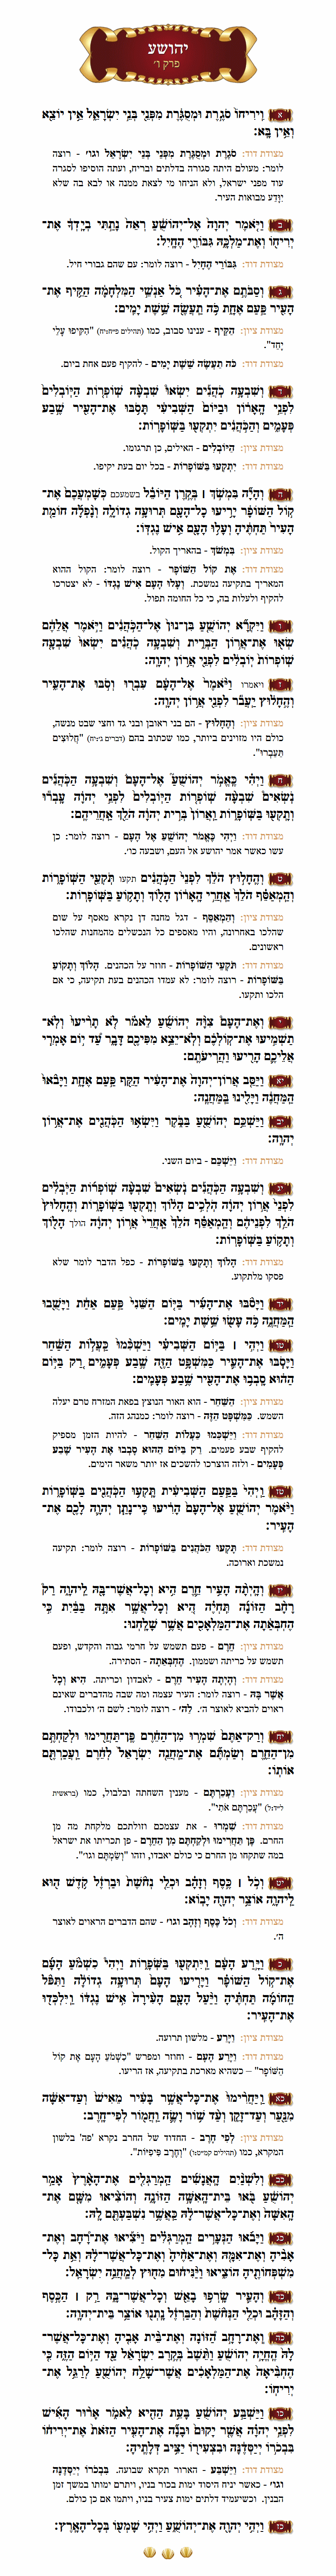 Sefer Yehoshua Chapter 6 with commentary